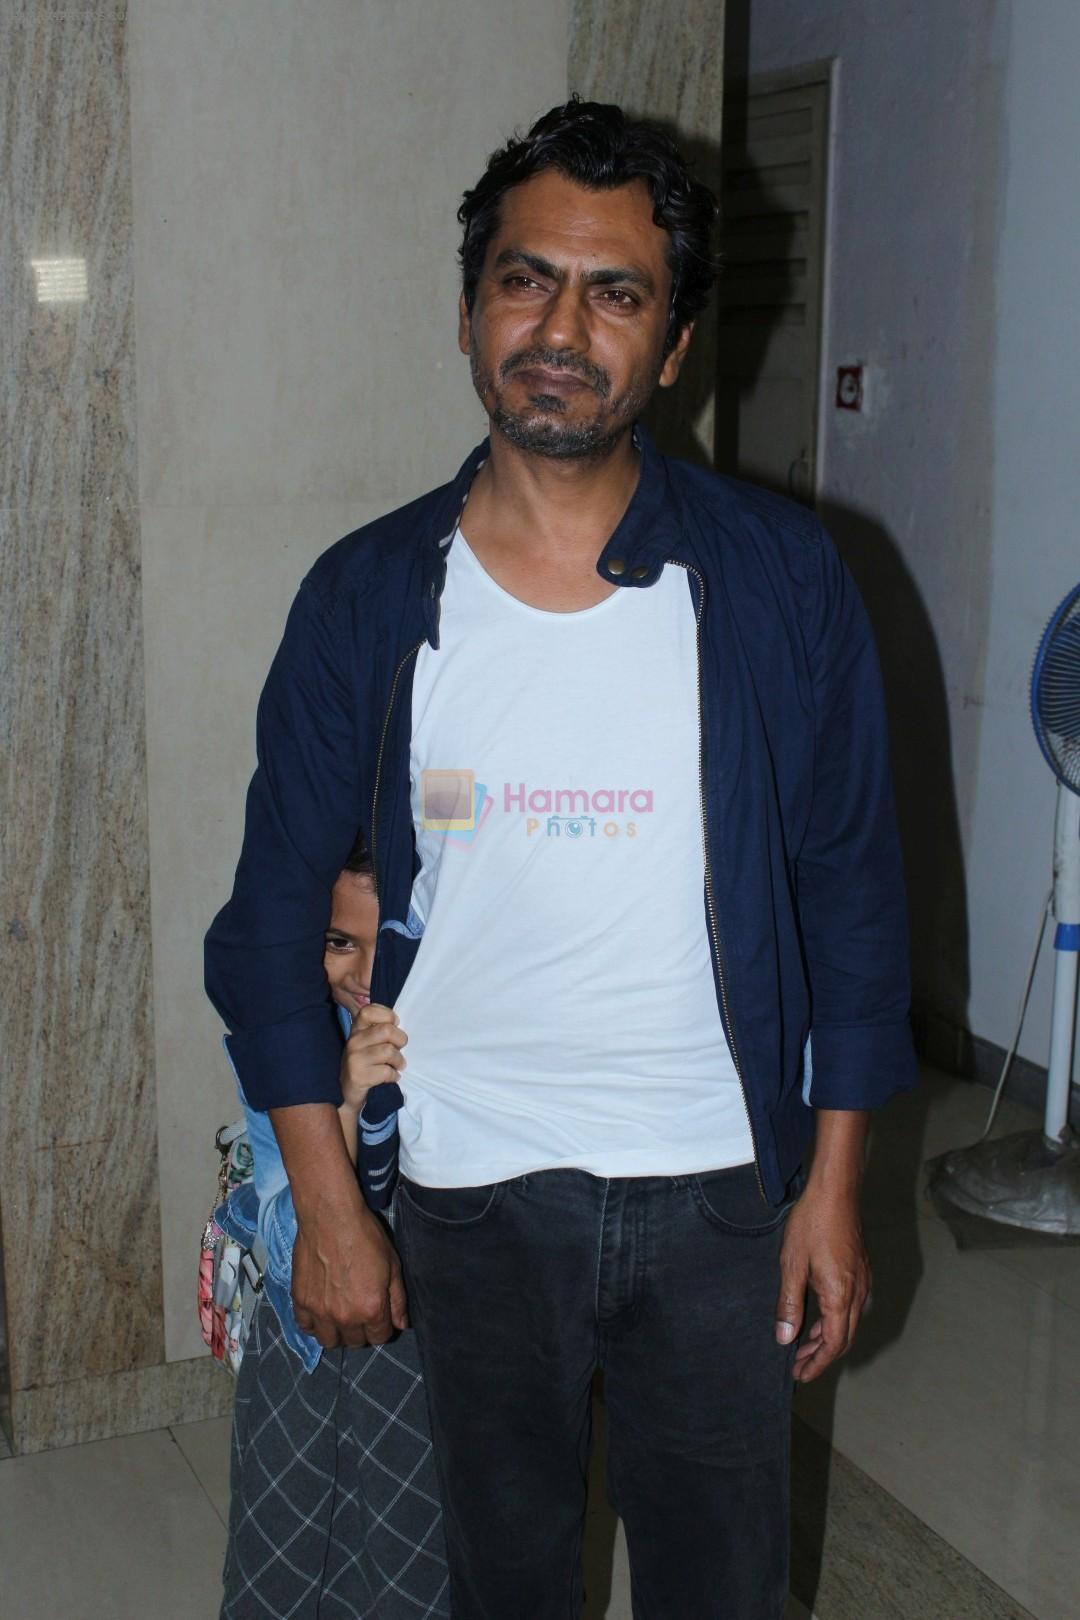 Nawazuddin Siddique at the Special Screening Of Film Munna Michael on 20th July 2017